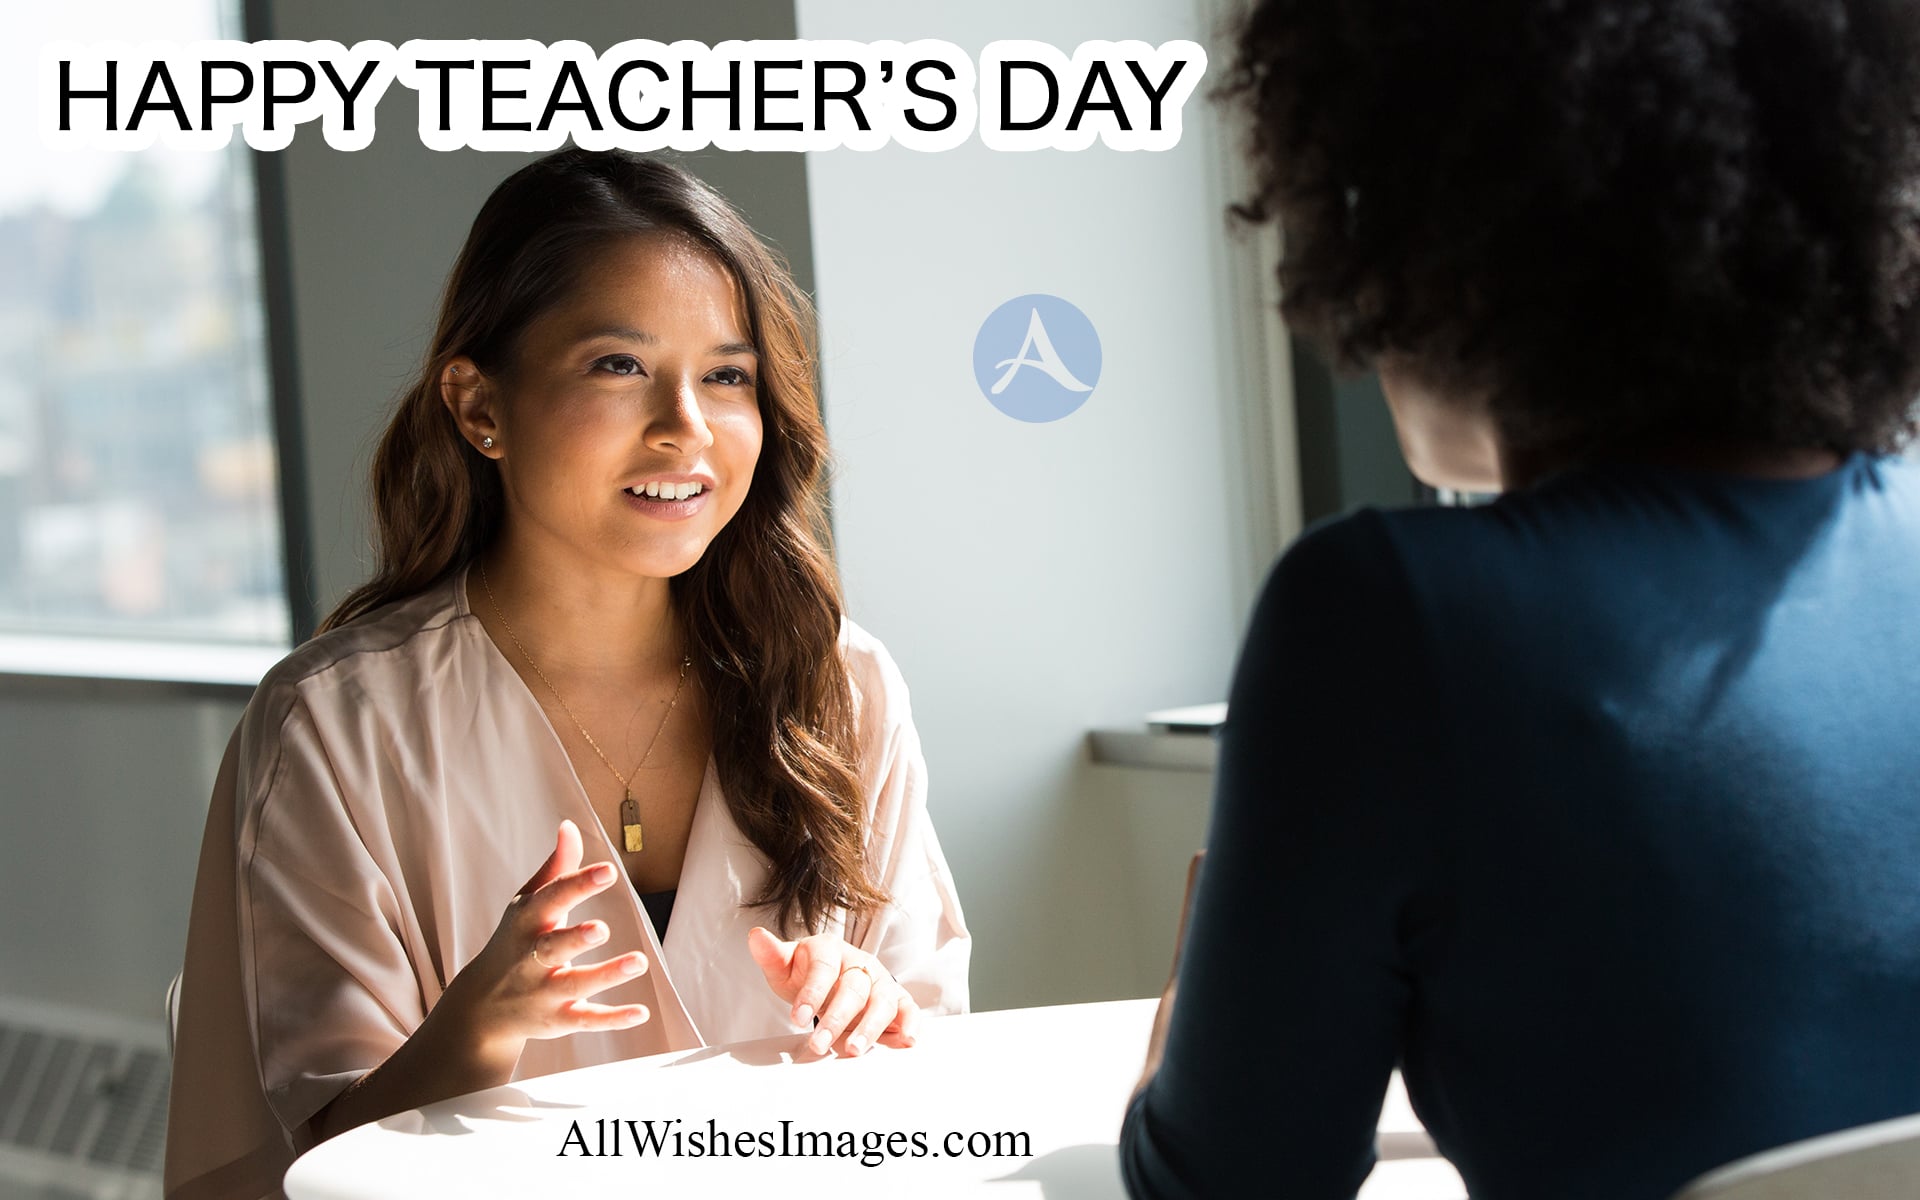 Teachers Day Wishes Images - All Wishes Images - Images for WhatsApp